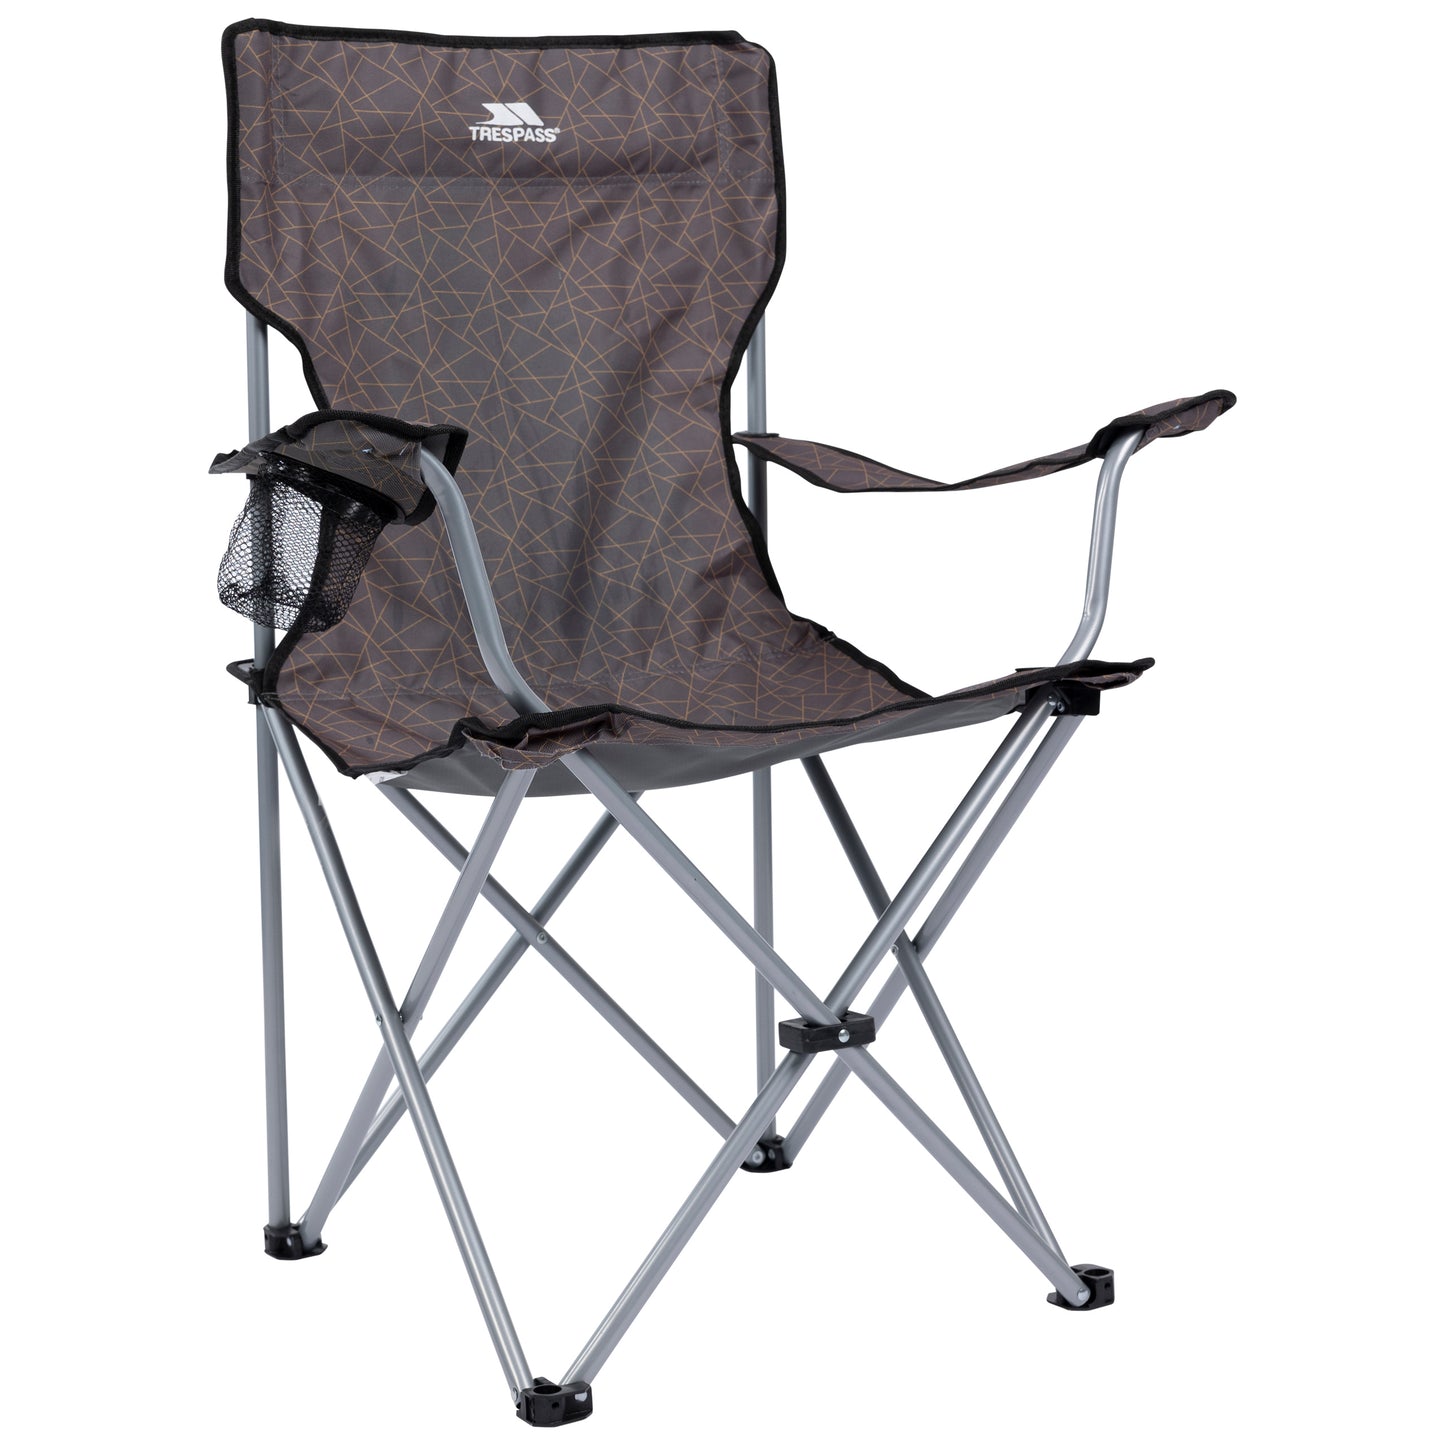 Branson Folding Camping Chair With Drinks Holder in Storm Grey Print